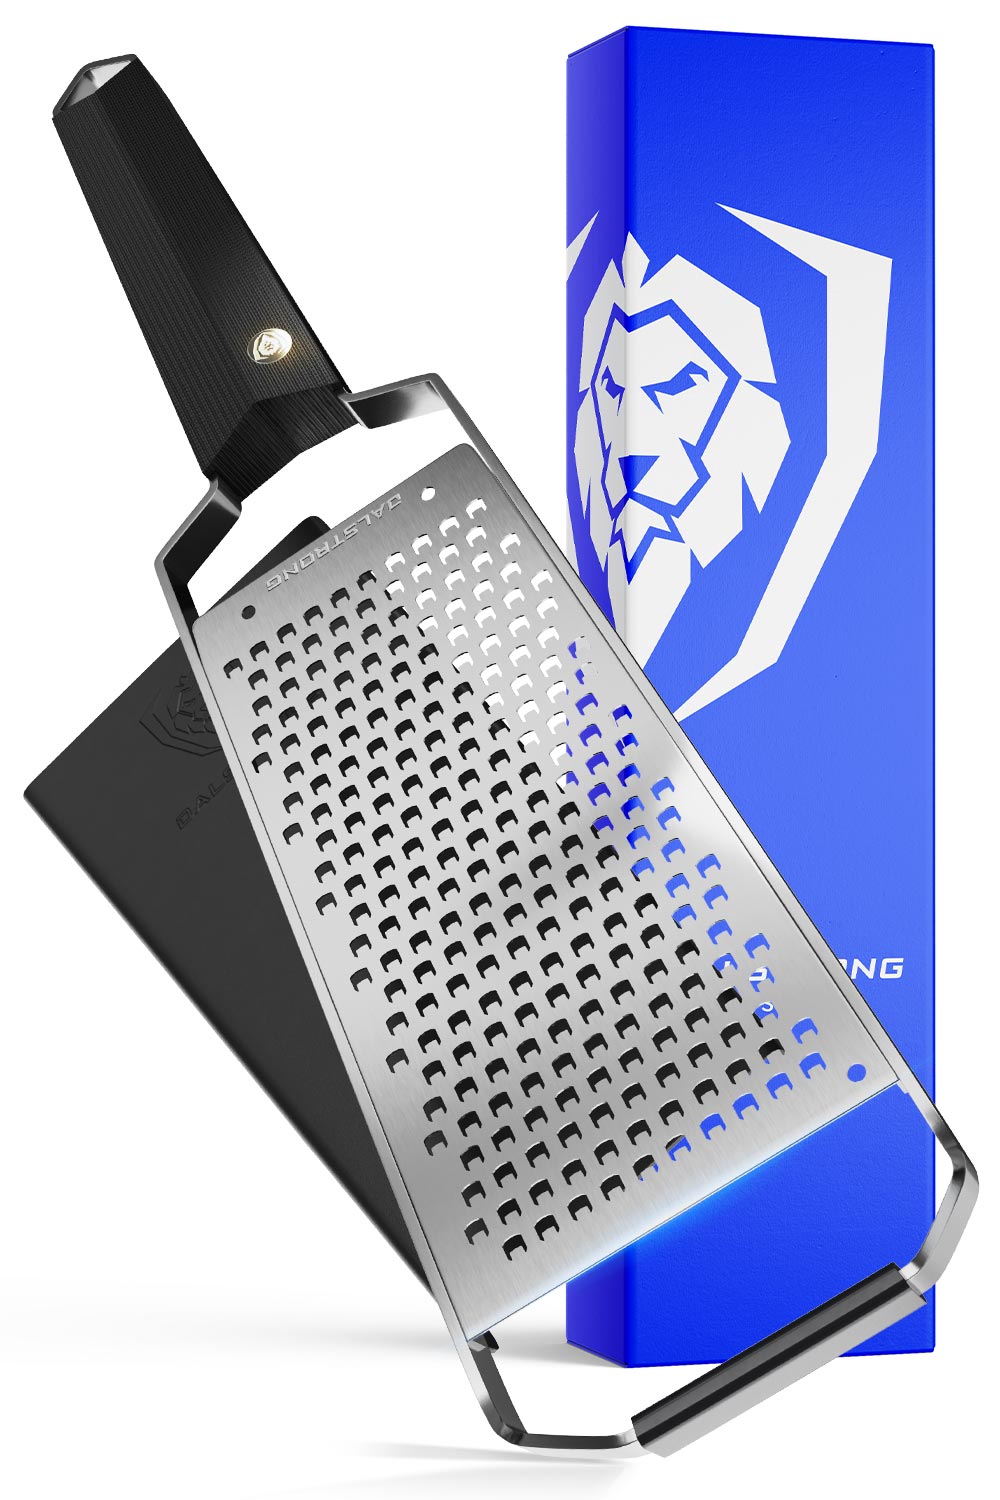 Large Cut Grater with Nonslip Grip - Elements Collection 